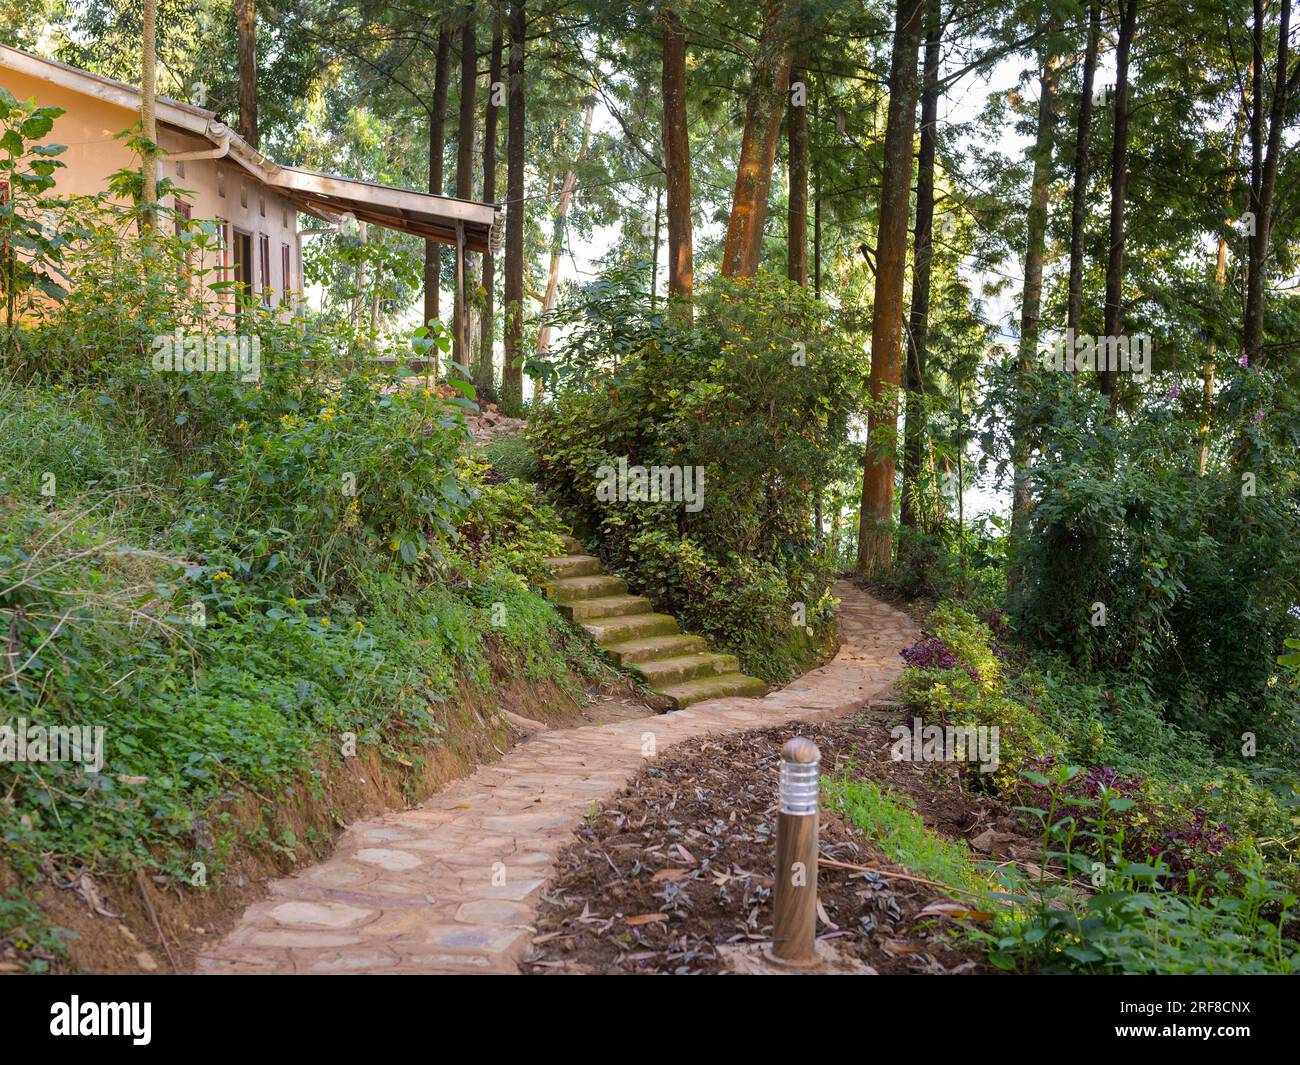 A small stone path leading through a tropical forest past a wooden hut Stock Photo